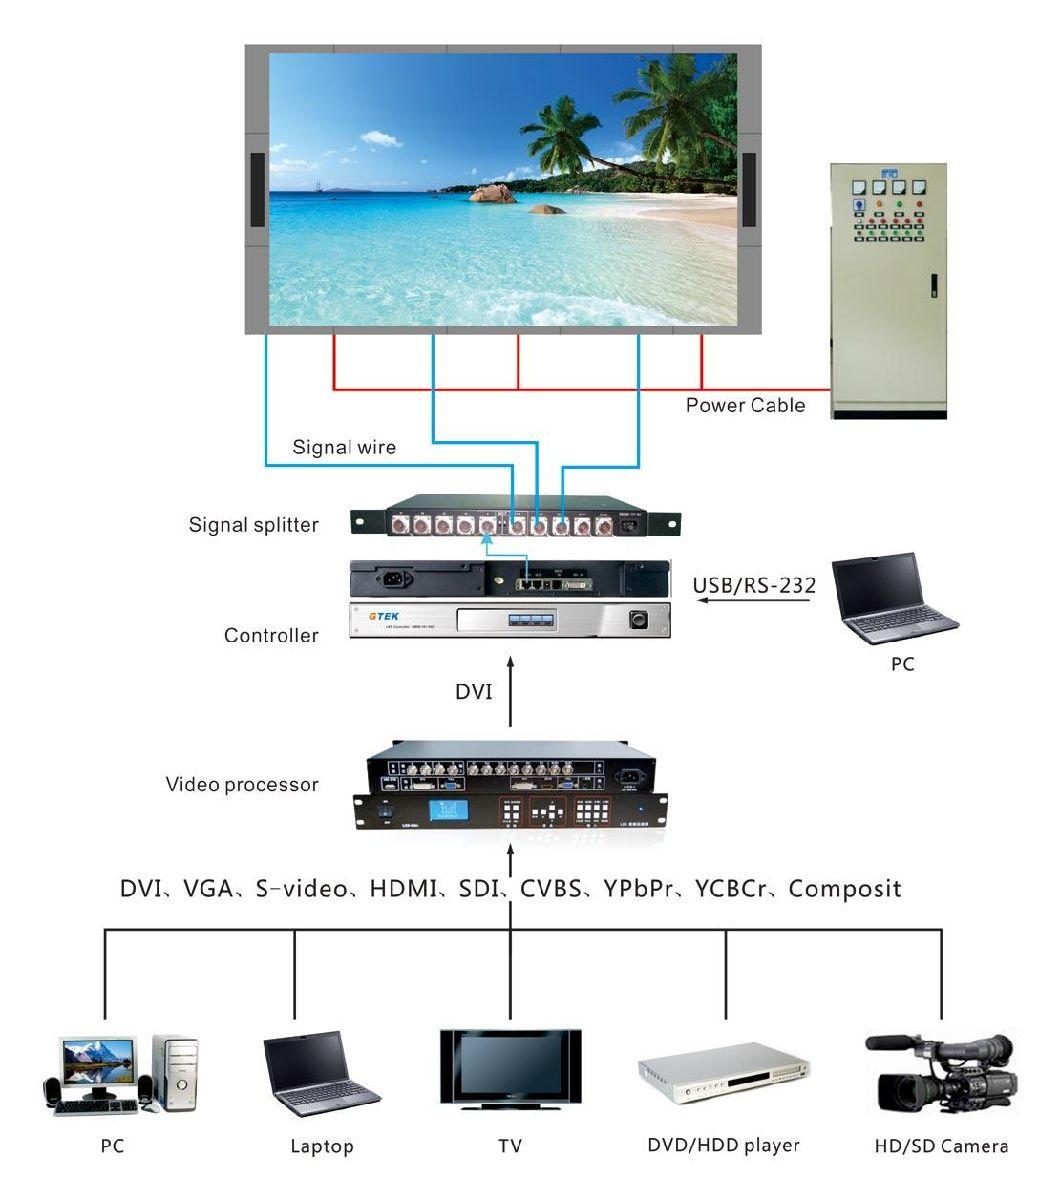 Shenzhen Signage Commercial Advertising TV Board Outdoor Display Panel LED Screen